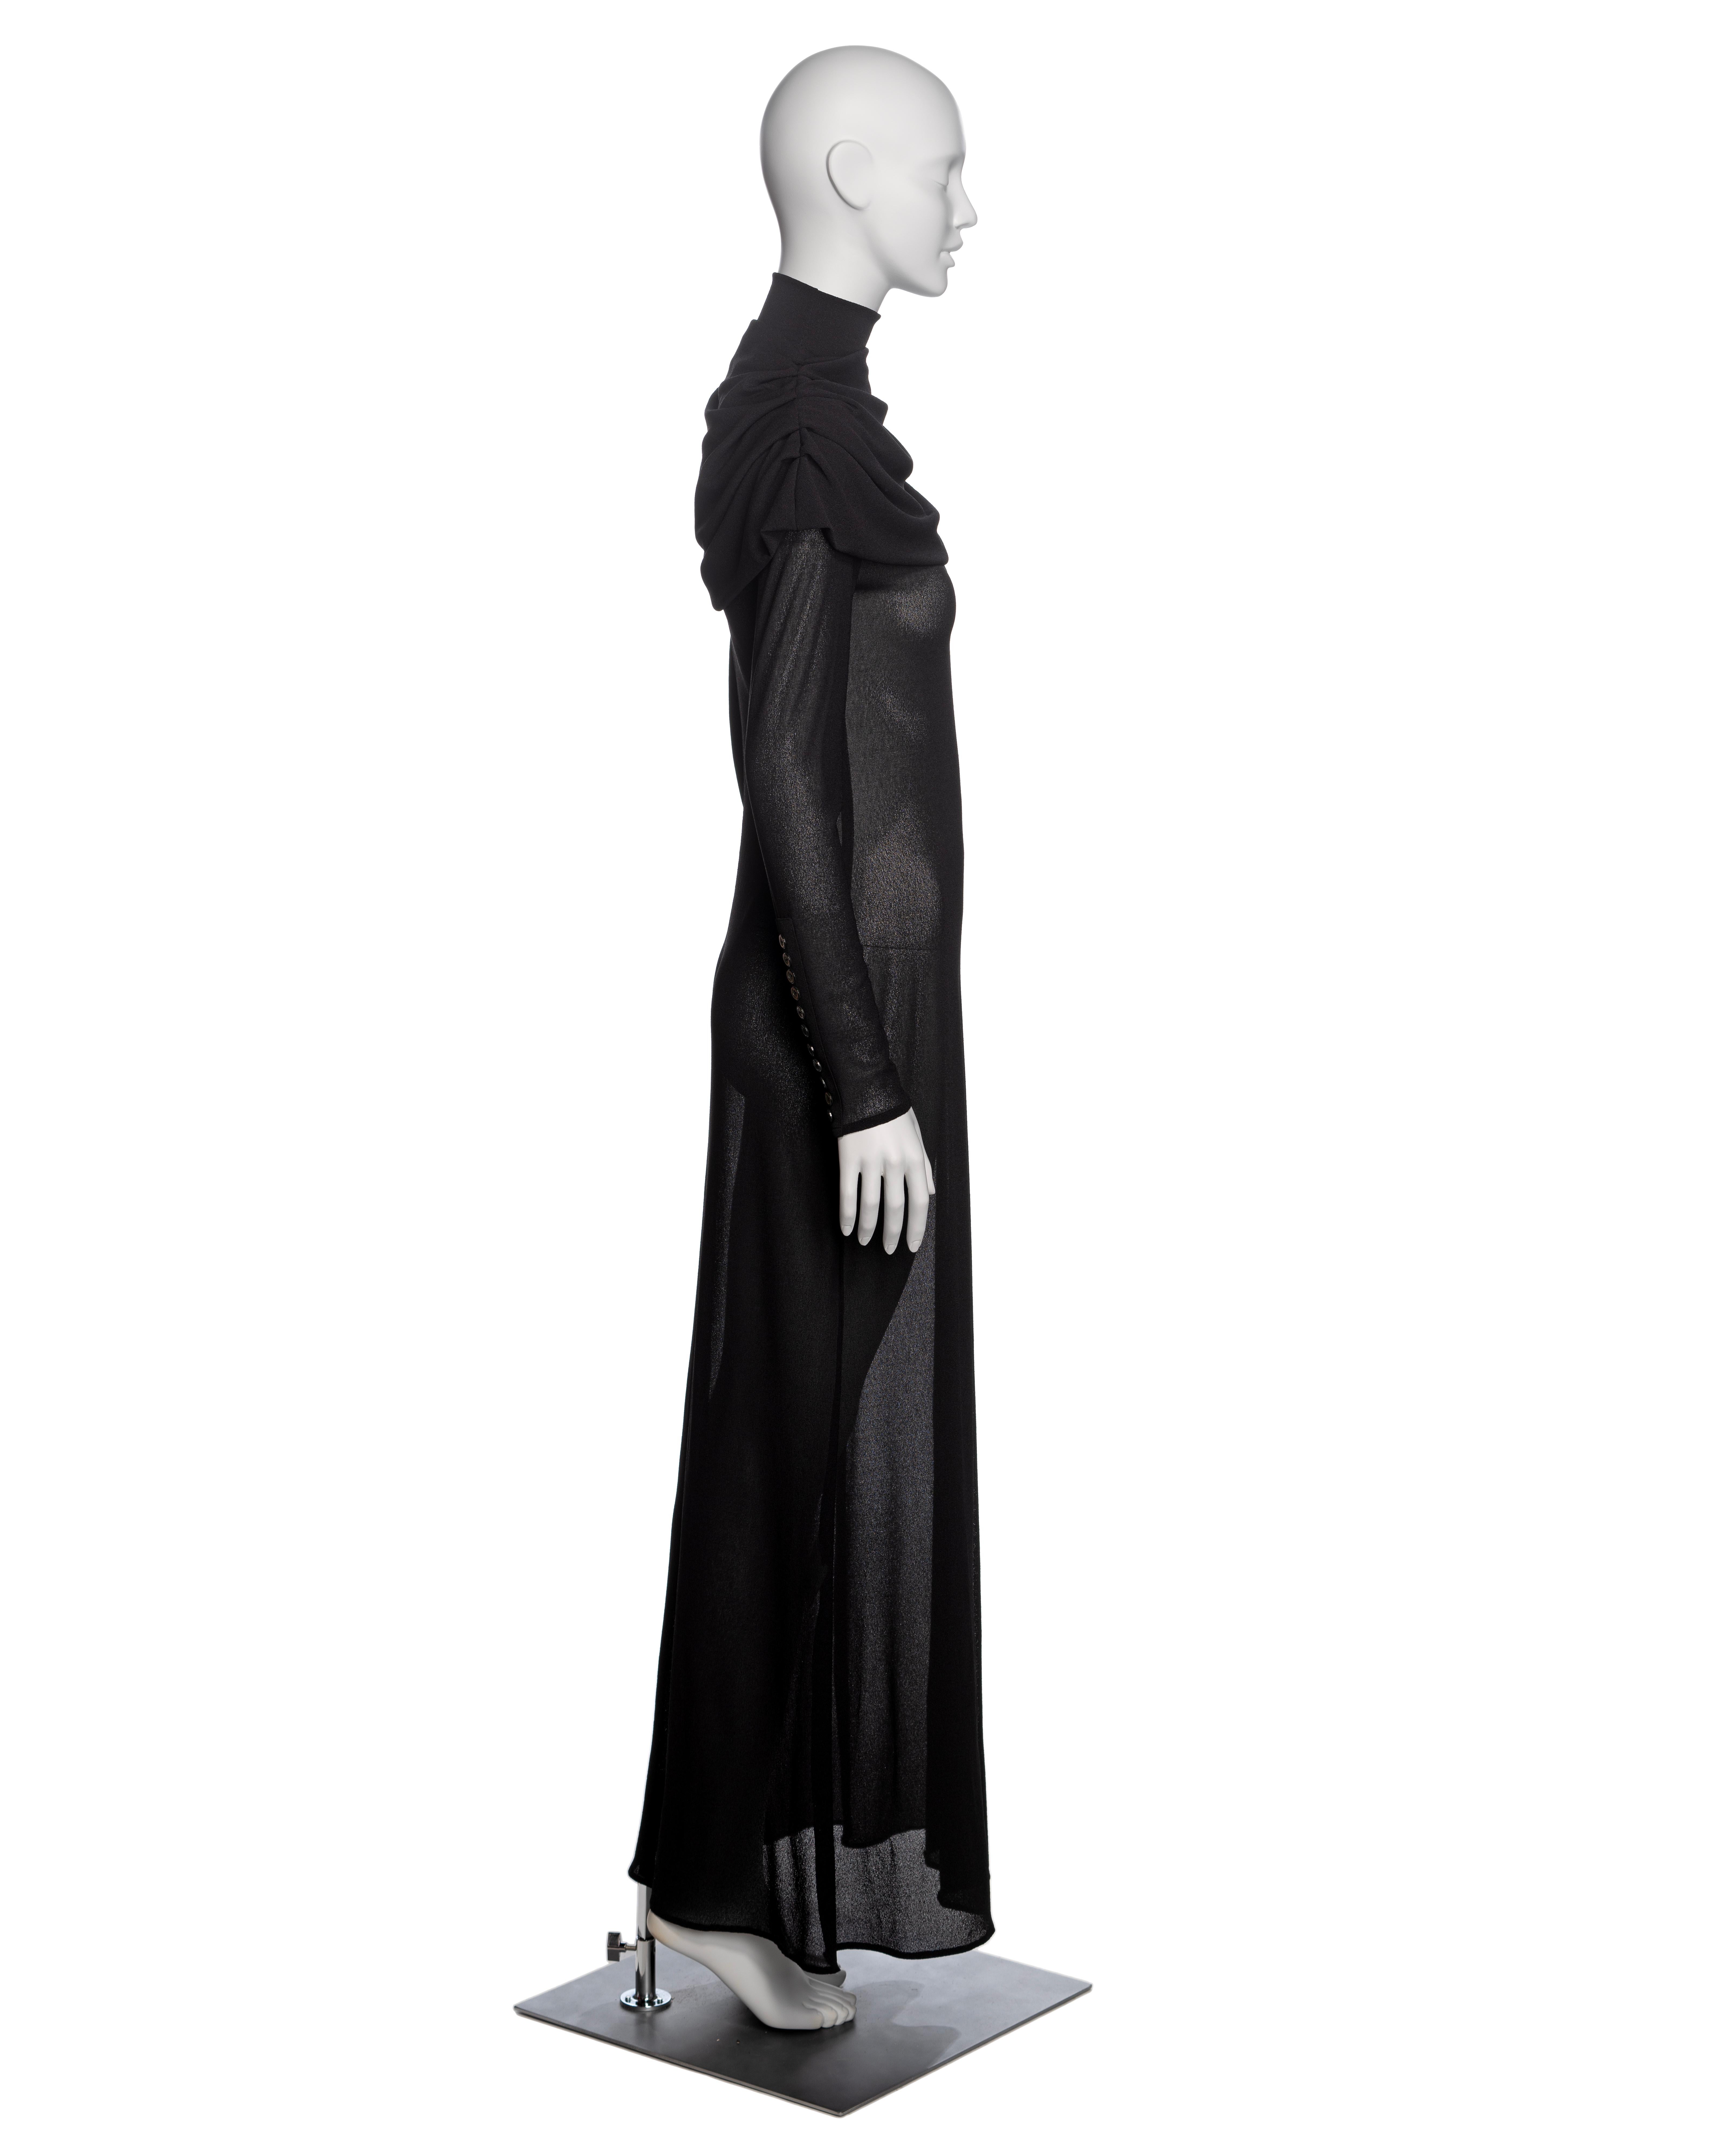 Alexander McQueen Black Mock Neck Evening Dress with Draped Cowl, 'Joan' FW 1998 For Sale 3